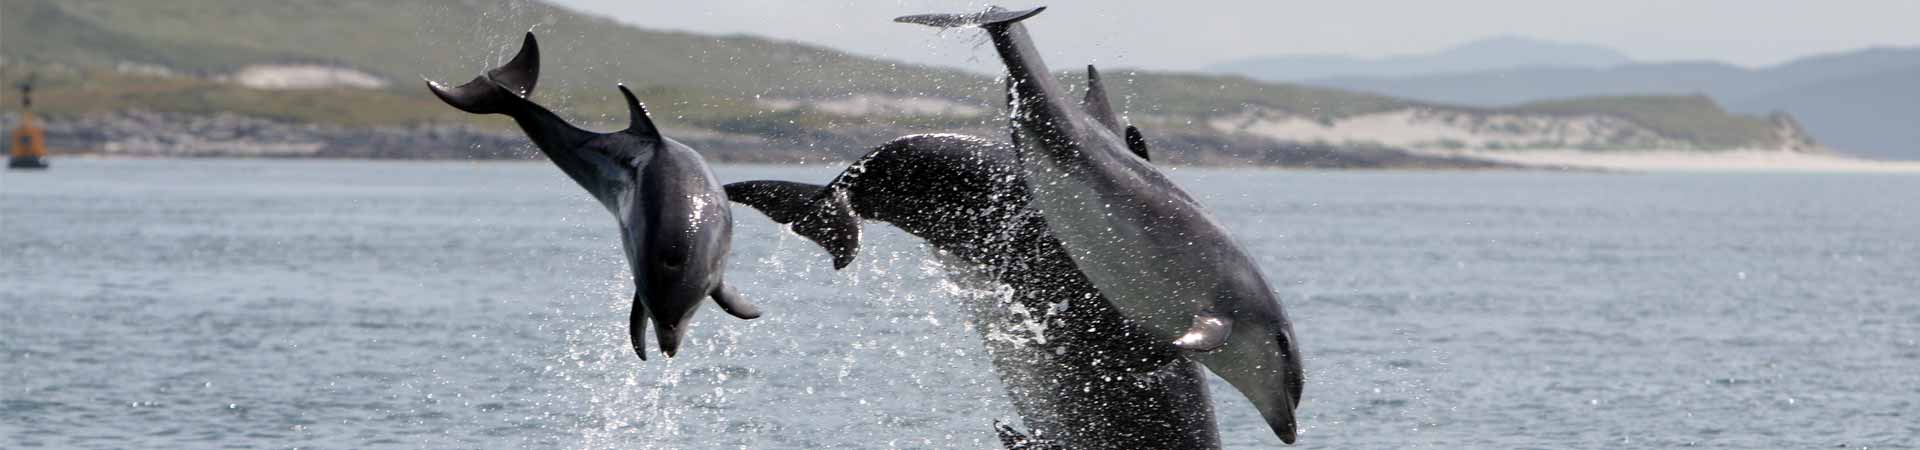 Dolphins jumping out of the water exuding joy near land